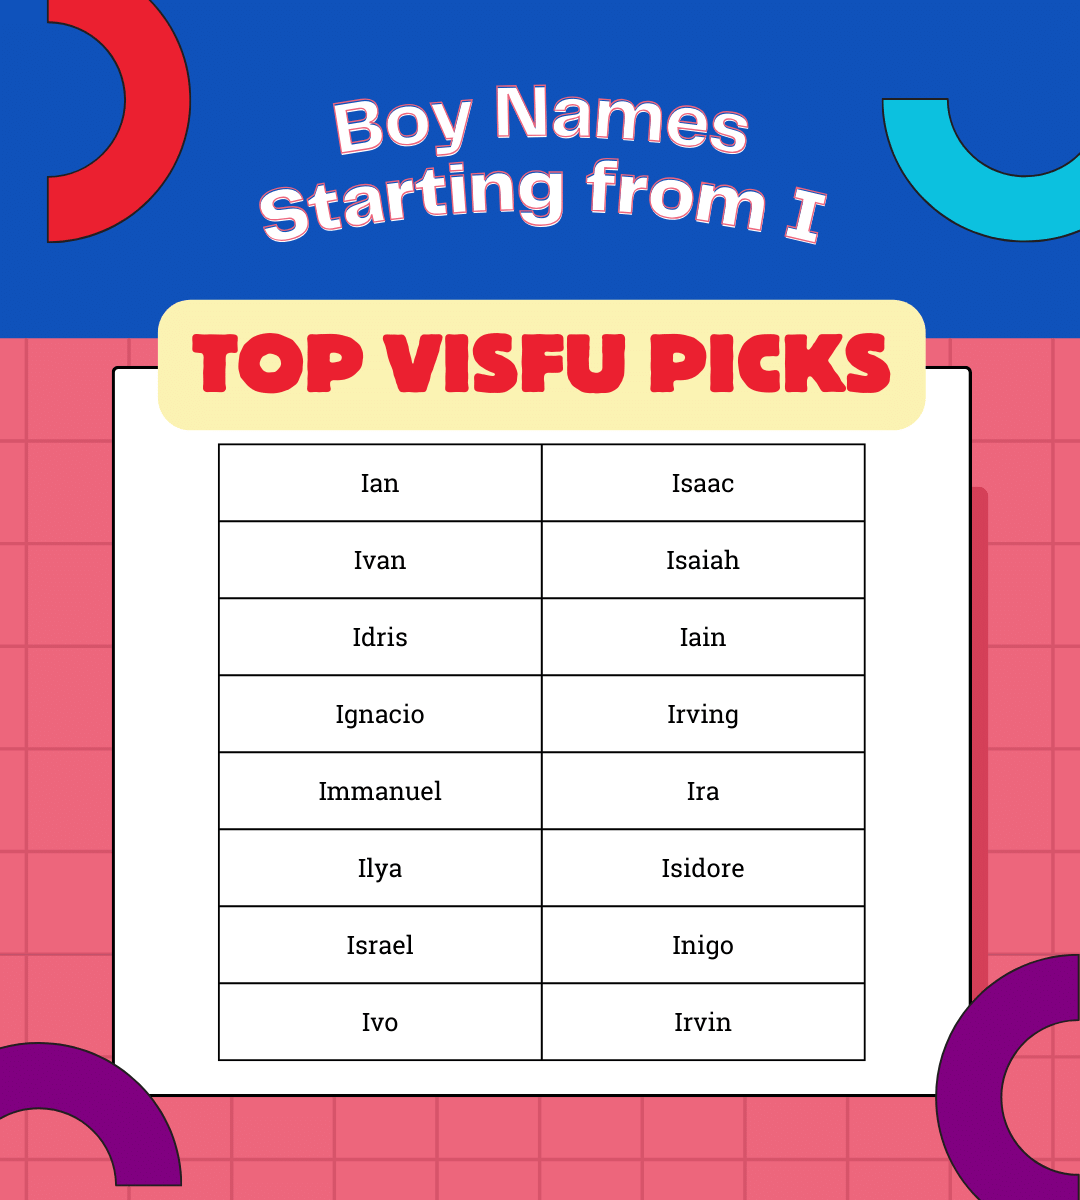 Boy names starting from I